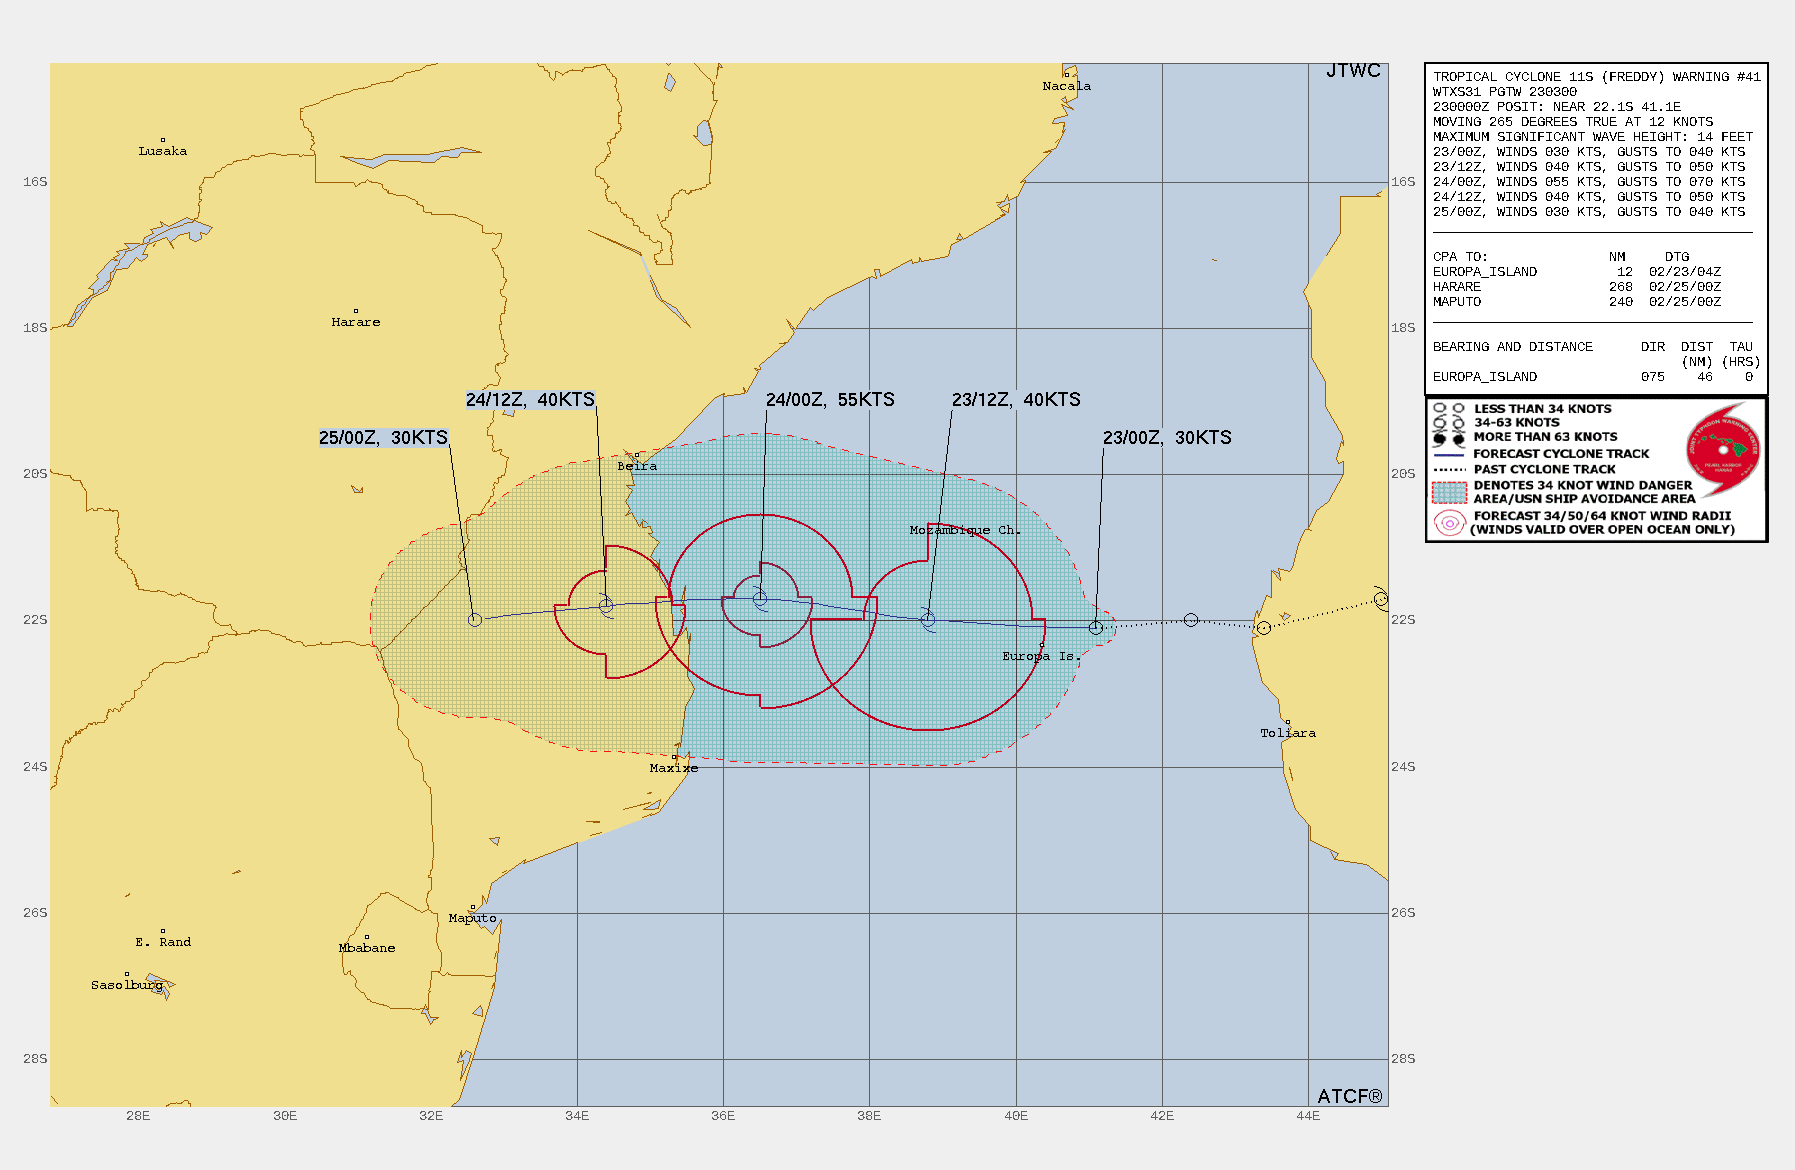 FORECAST REASONING.  SIGNIFICANT FORECAST CHANGES: THERE ARE NO SIGNIFICANT CHANGES TO THE FORECAST FROM THE PREVIOUS WARNING.  FORECAST DISCUSSION: TROPICAL CYCLONE 11S (FREDDY) HAS EMERGED OVER THE MOZAMBIQUE CHANNEL AND WILL CONTINUE WESTWARD, MAKING LANDFALL IN MOZAMBIQUE IN 24-36 HOURS. DYNAMICAL MODEL GUIDANCE IS IN GOOD AGREEMENT ON THIS TRACK AS THE SUBTROPICAL RIDGE TO THE SOUTH GUIDES FREDDY ACROSS THE CHANNEL. SOME INTENSIFICATION IS EXPECTED AS FREDDY REGENERATES DEEP CONVECTION AROUND ITS STILL WELL-DEFINED LOW-LEVEL CIRCULATION. HOWEVER, THE BROADNESS OF THE CIRCULATION IN THE WAKE OF CROSSING MADAGASCAR LIKELY PLACES A LIMIT ON HOW RAPIDLY THIS INTENSIFICATION CAN OCCUR. LIGHT SOUTHWESTERLY VERTICAL SHEAR AND THE PROXIMITY OF DRY AIR TO THE SOUTHWEST MAY ALSO RESTRAIN THE PACE OF DEVELOPMENT SOMEWHAT. DYNAMICAL MODEL GUIDANCE PREDICTS A RANGE OF PEAK INTENSITIES FROM 40 TO 60 KT PRIOR TO LANDFALL. THE JTWC INTENSITY FORECAST IS IN THE UPPER END OF THIS RANGE, SHOWING A PEAK OF 55 KT IN 24 HOURS, CLOSEST TO THE HWRF, COAMPS-TC, AND GFS MODELS. DYNAMICAL MODELS GENERALLY AGREE THAT AXISYMMETRIZATION OF FREDDY'S CONVECTIVE CORE WILL OCCUR DURING THE 12-24 HOUR PERIOD AS DEEPLY MOIST AIR IS ADVECTED FROM THE NORTHERN SIDE OF THE CYCLONE AROUND TO THE SOUTHERN SIDE, REPLACING THE DRY AIR THAT CURRENTLY EXISTS IN THE SOUTHWESTERN QUADRANT. THIS STRUCTURAL EVOLUTION IS FAVORABLE FOR INTENSIFICATION, HENCE JTWC'S ASSESSMENT THAT THE HWRF, COAMPS-TC, AND GFS FORECASTS ARE REALISTIC. THERE IS A NORMAL (MODERATE) LEVEL OF CONFIDENCE IN THE FORECAST OVERALL.